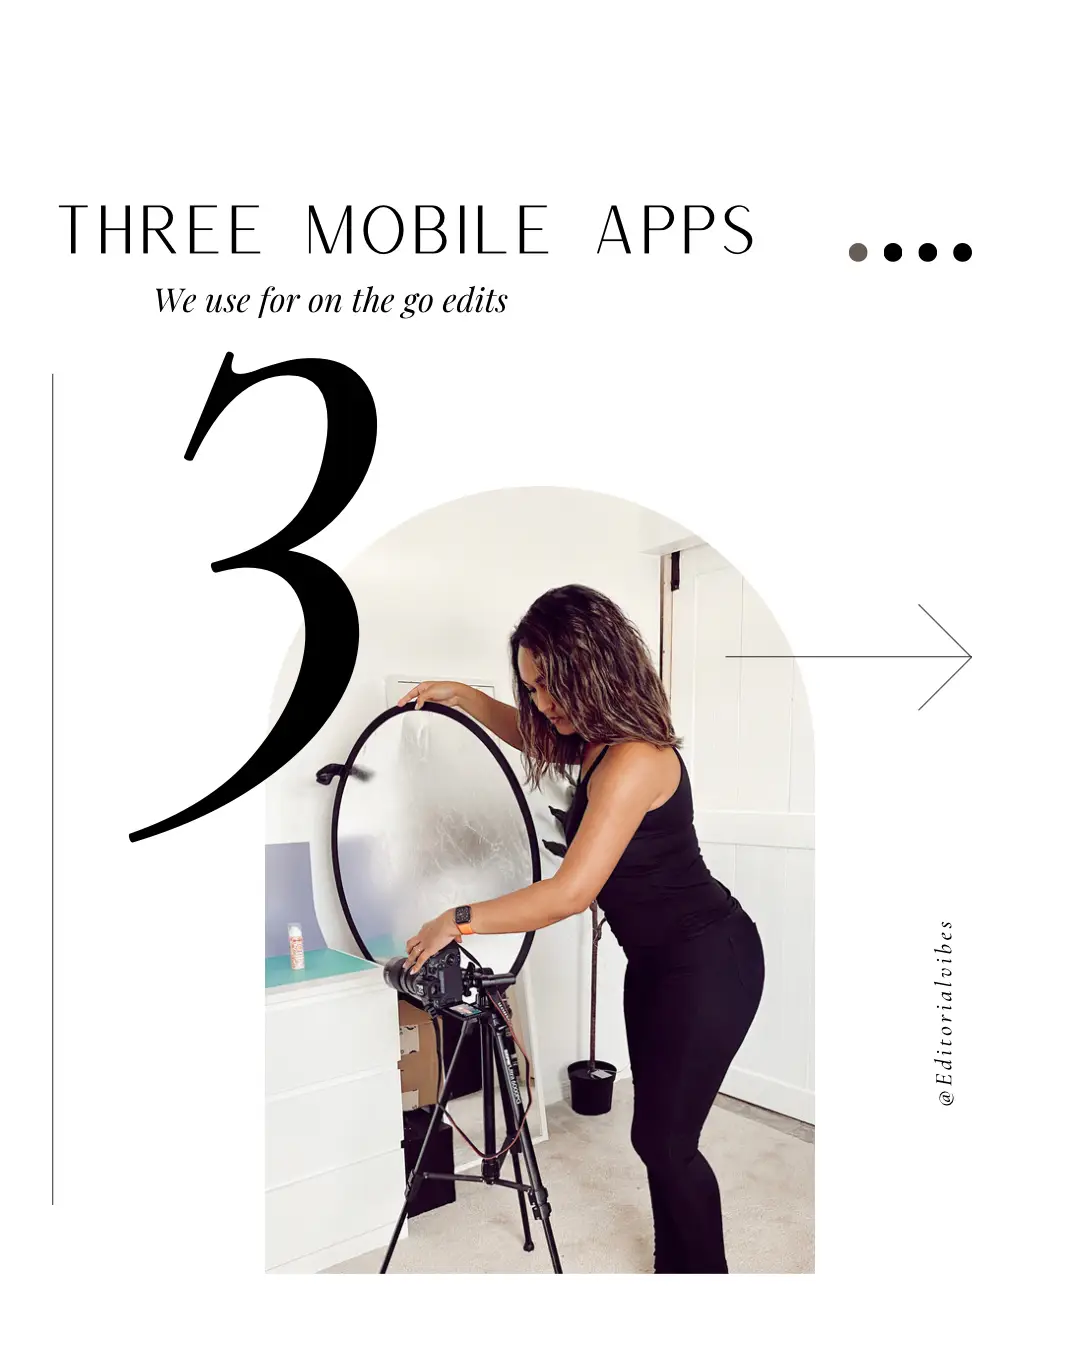 3 On-the go apps for content creation's images